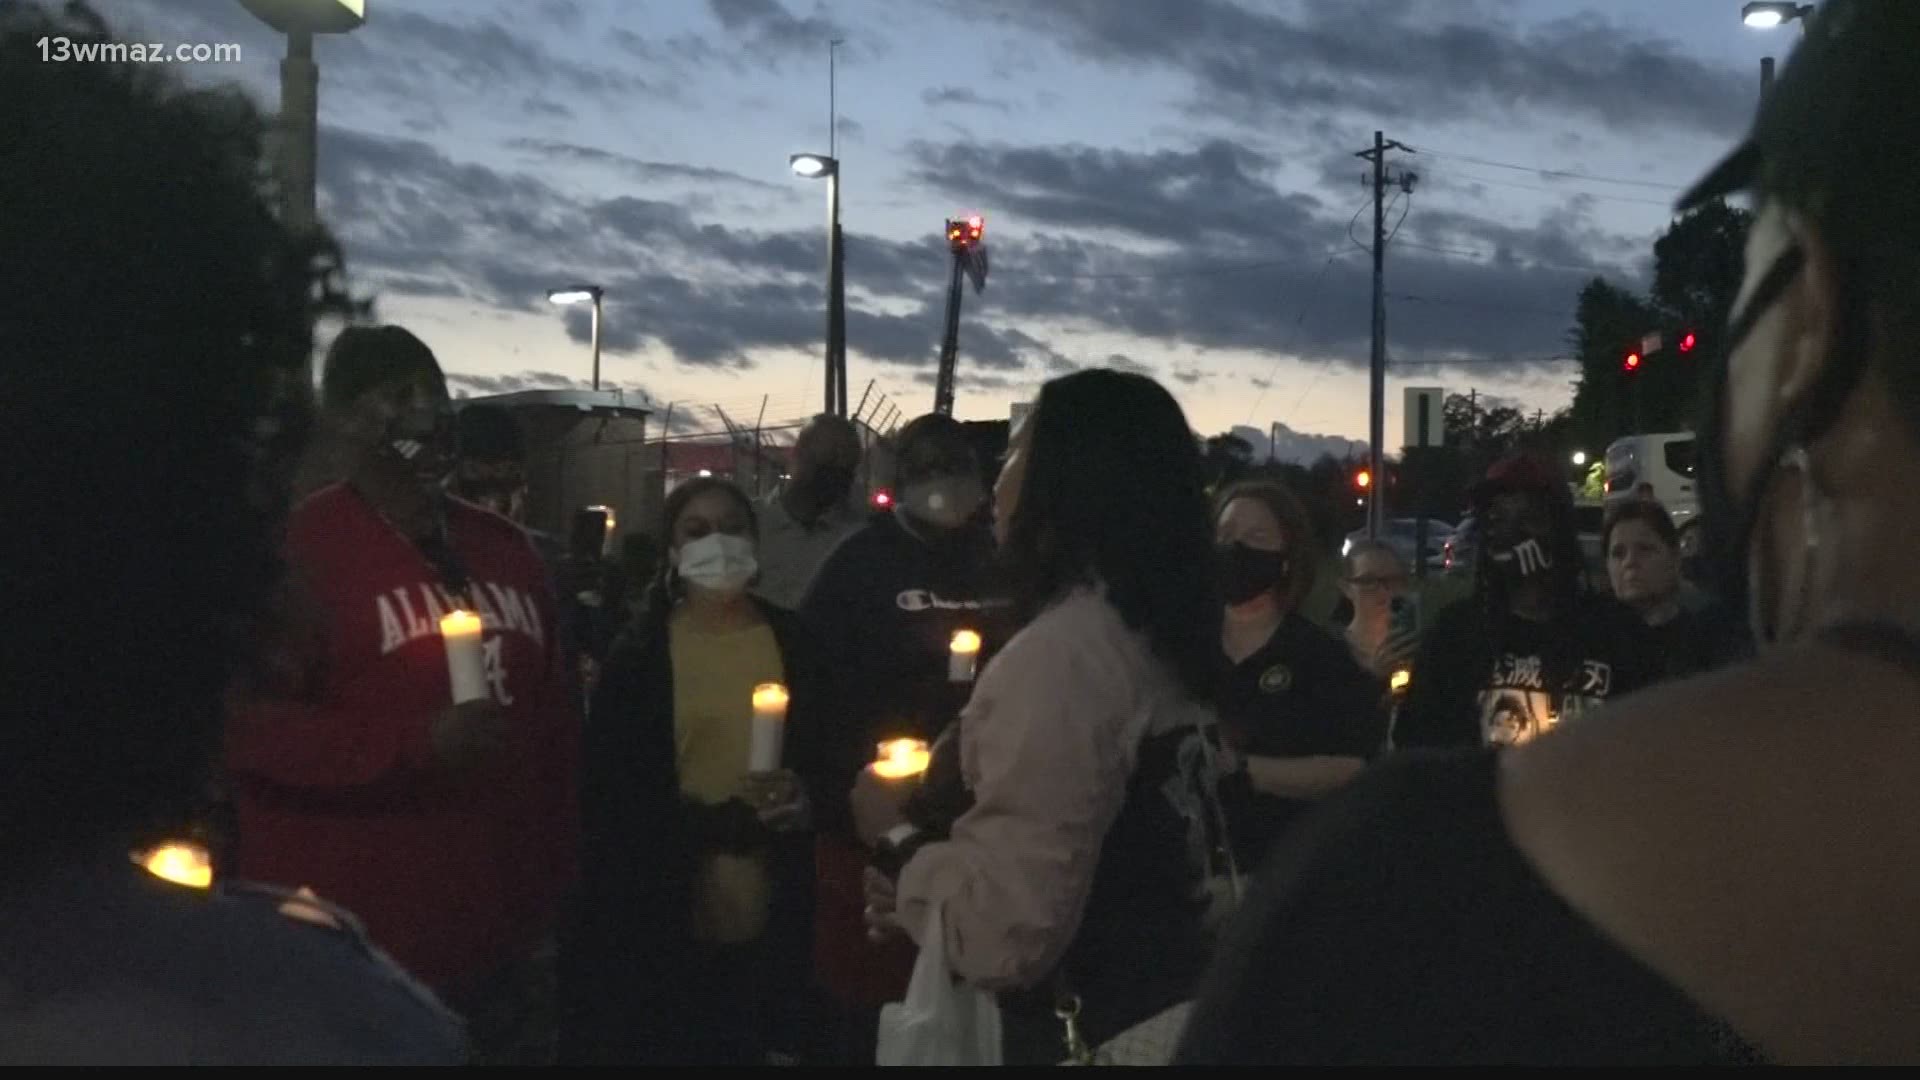 The family and colleagues of Christopher Knight gathered in front of the Bibb Sheriff's Office for a candlelight vigil to remember the fallen deputy.